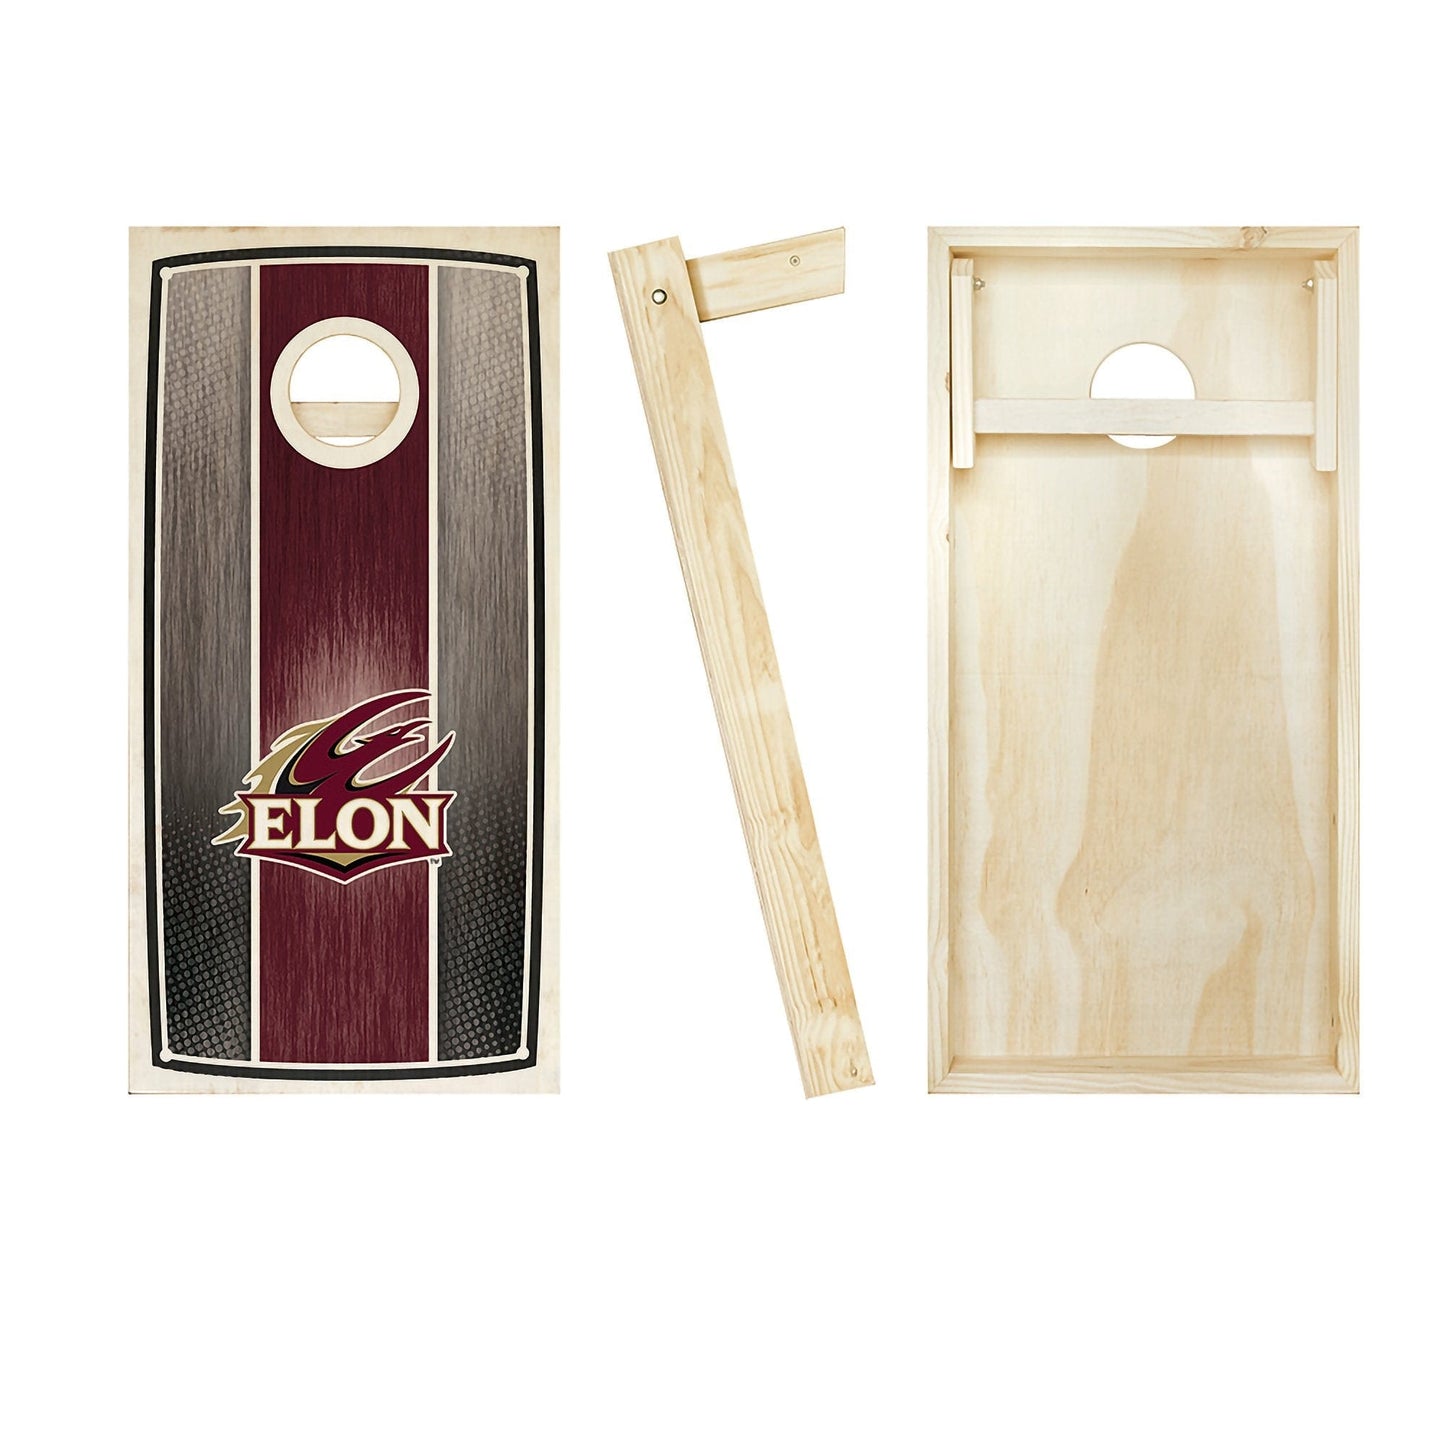 Elon Stained Striped board entire set